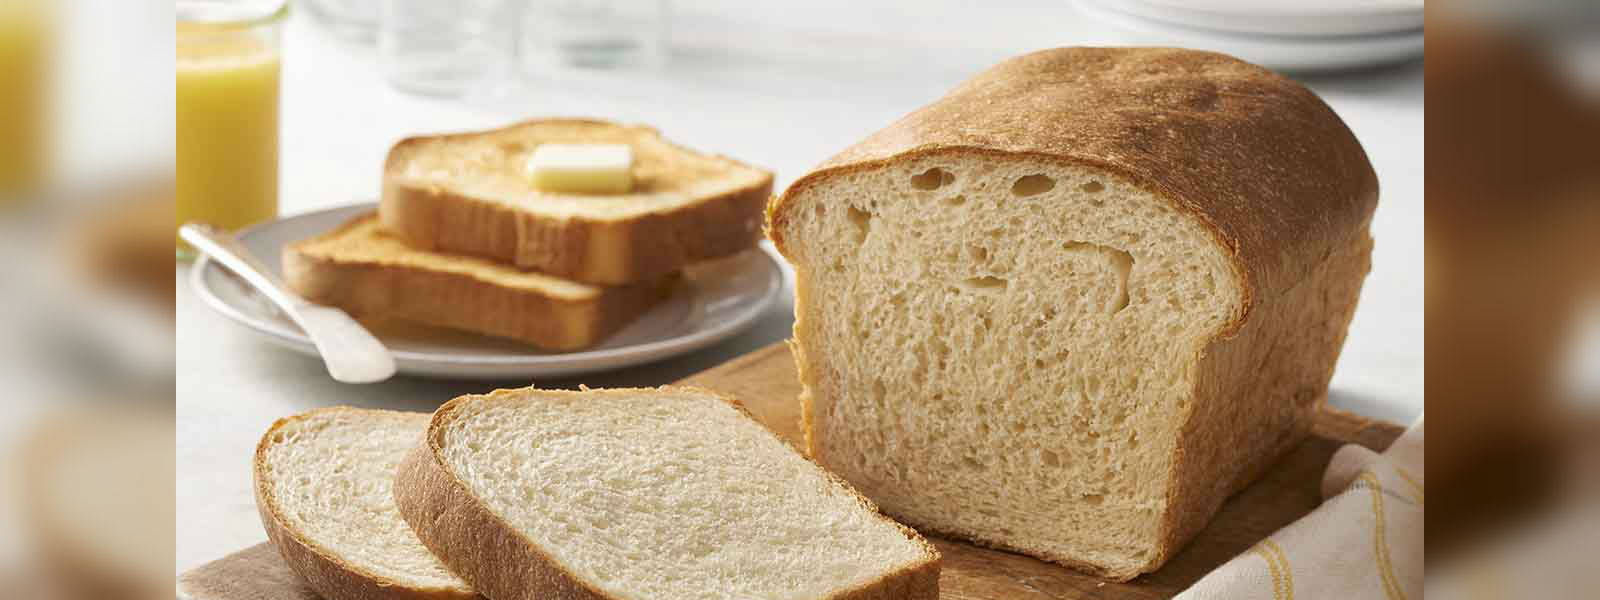 Bread prices increased by Rs. 10/-